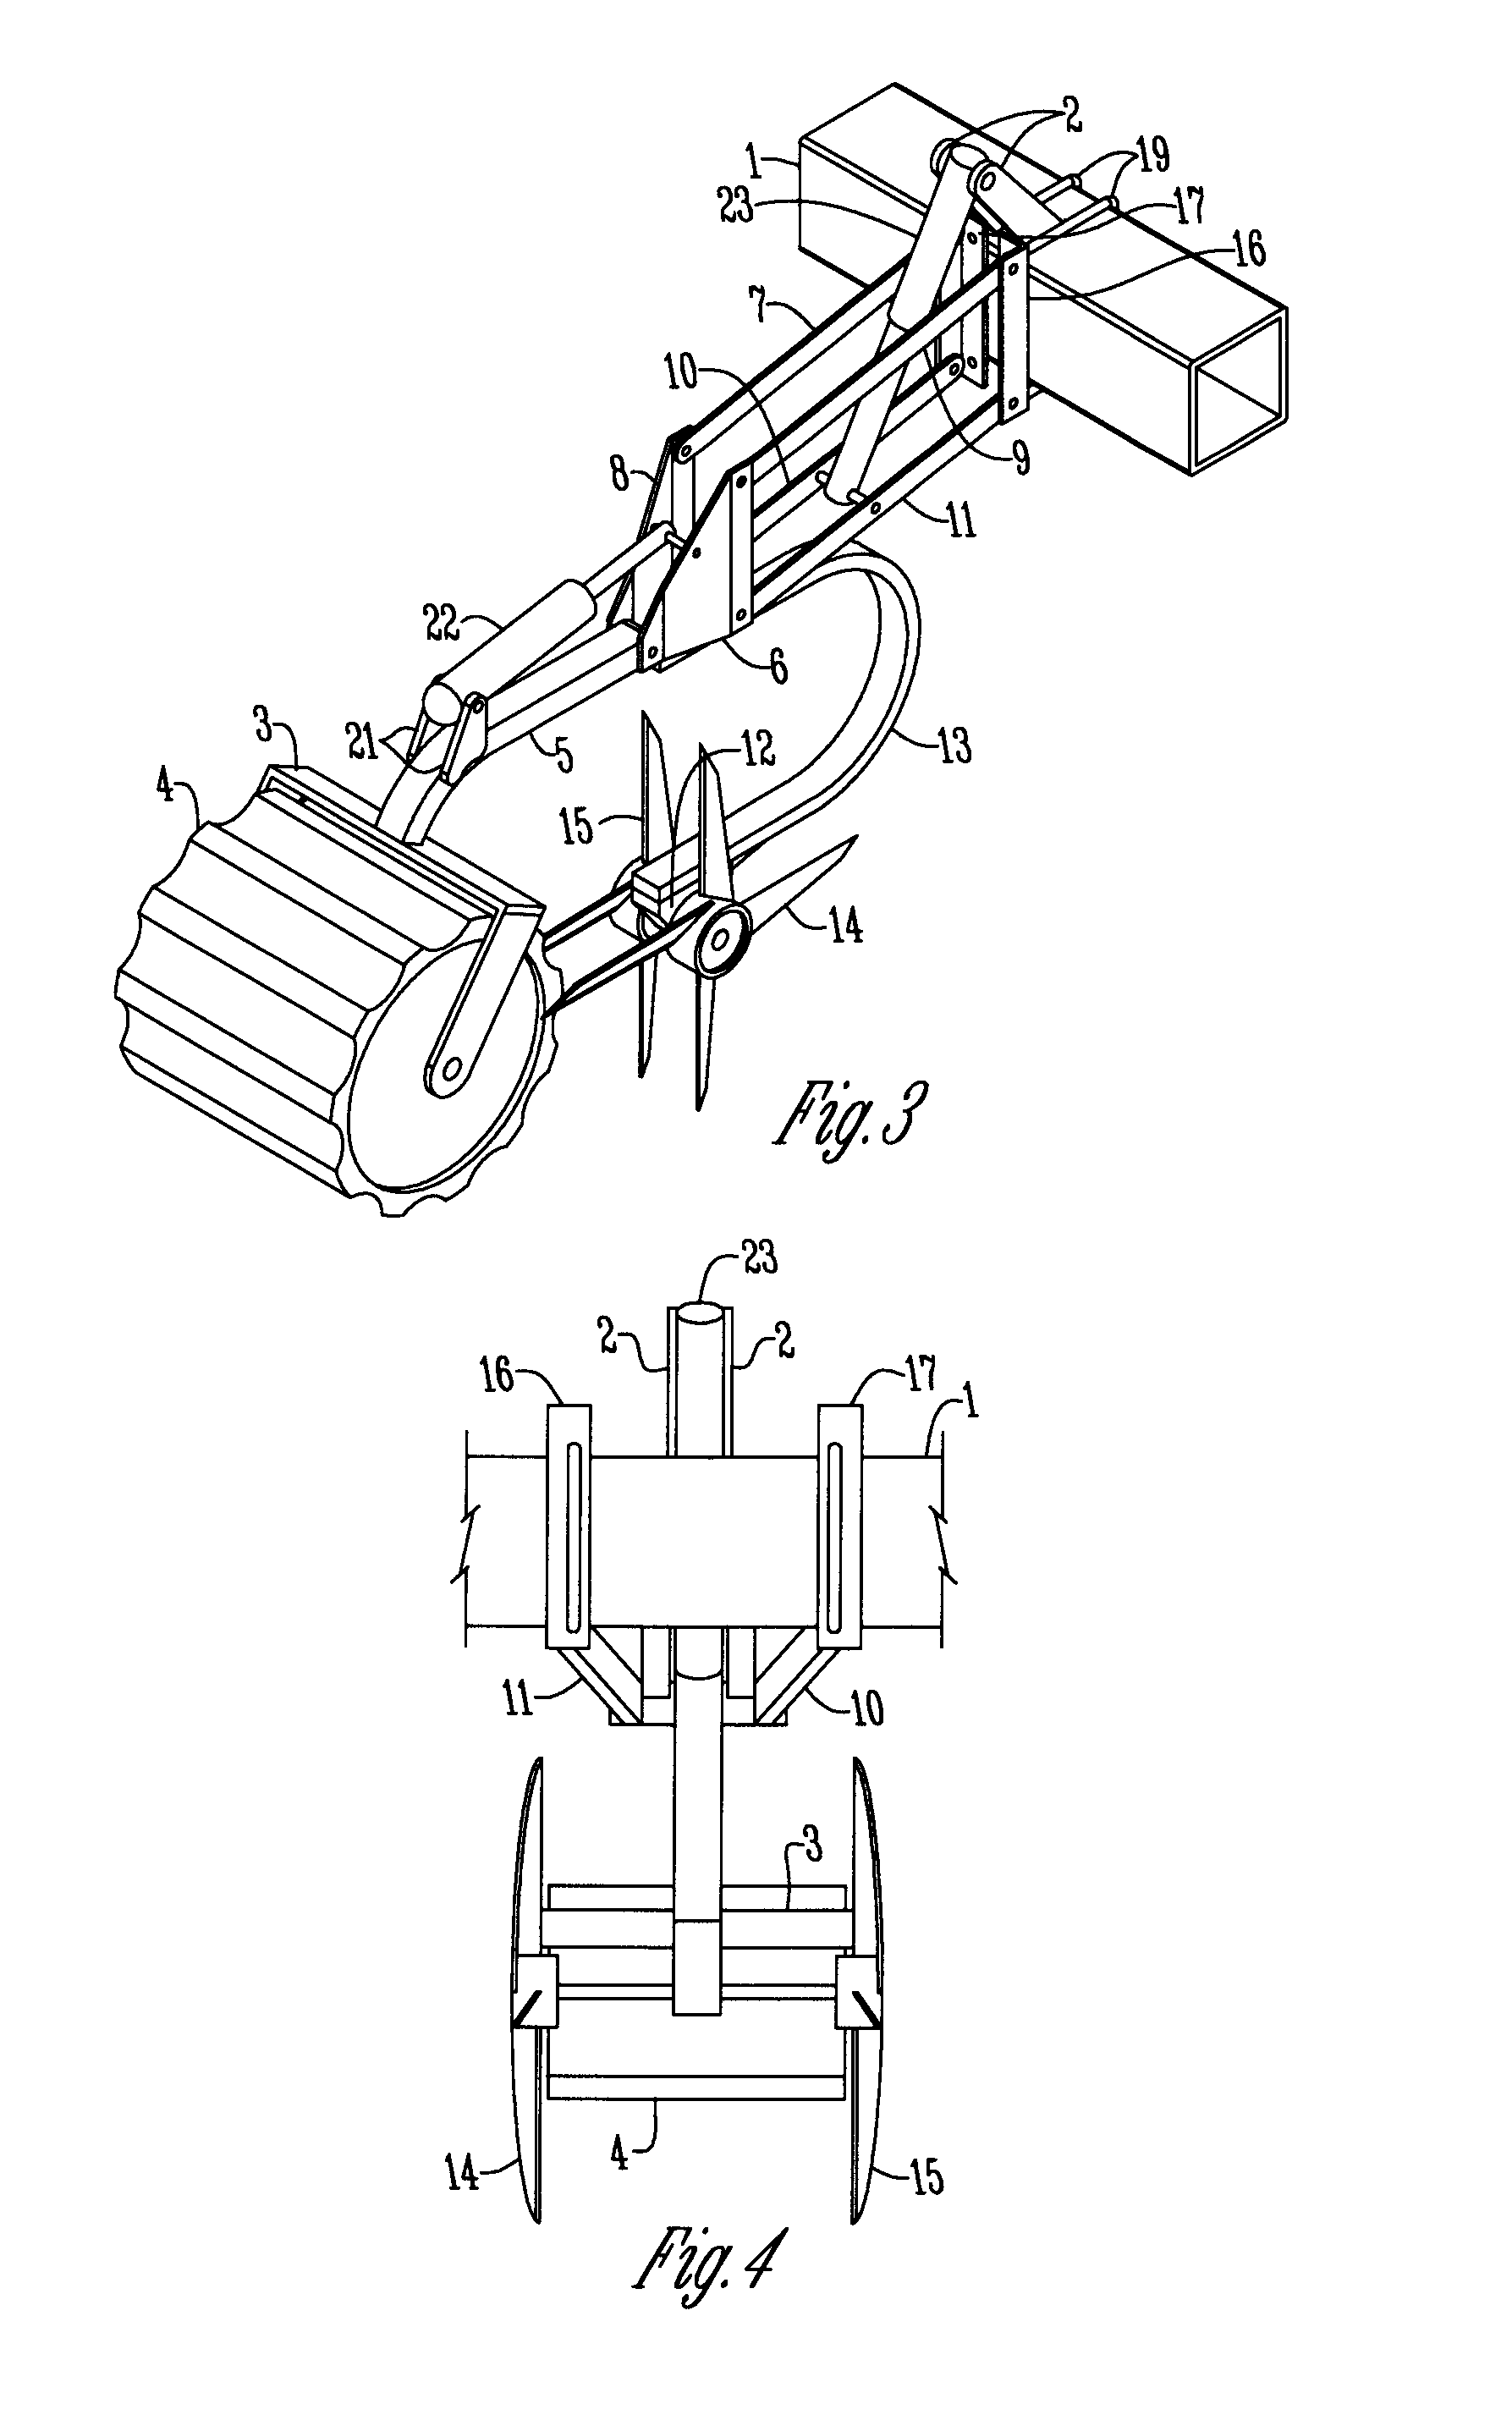 Tillage device for agricultural machinery or implements to reduce compaction caused by wheels in a field